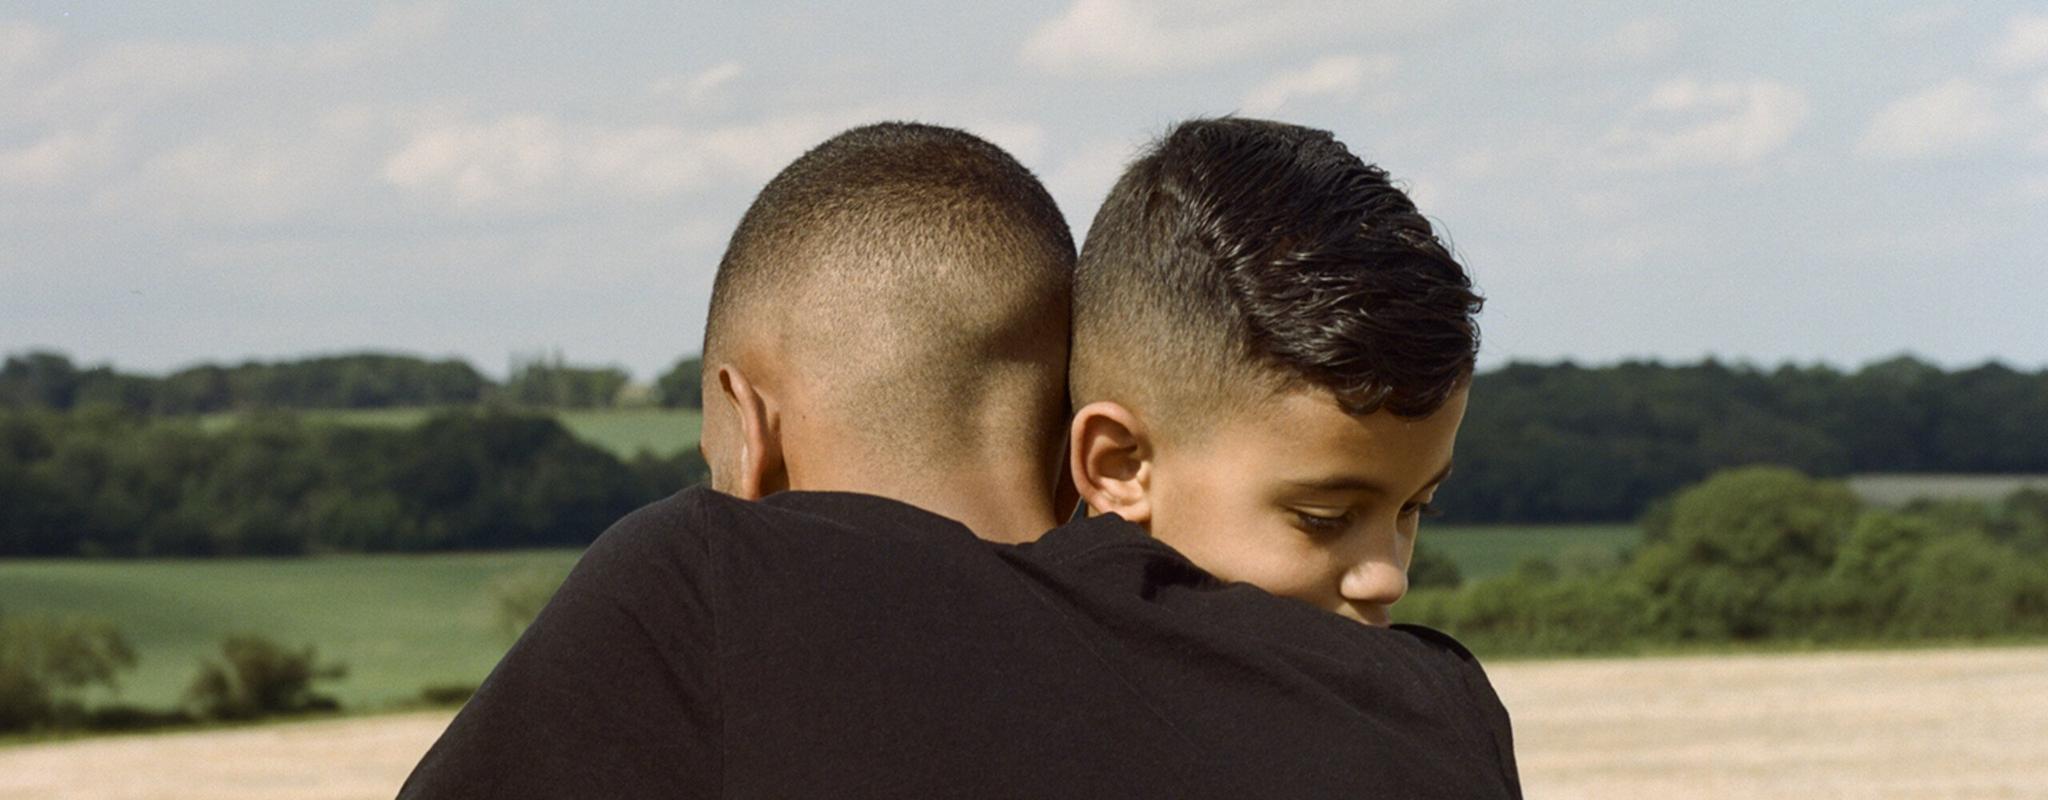 Two brothers hug in a park a few days after lockdown restrictions were eased.